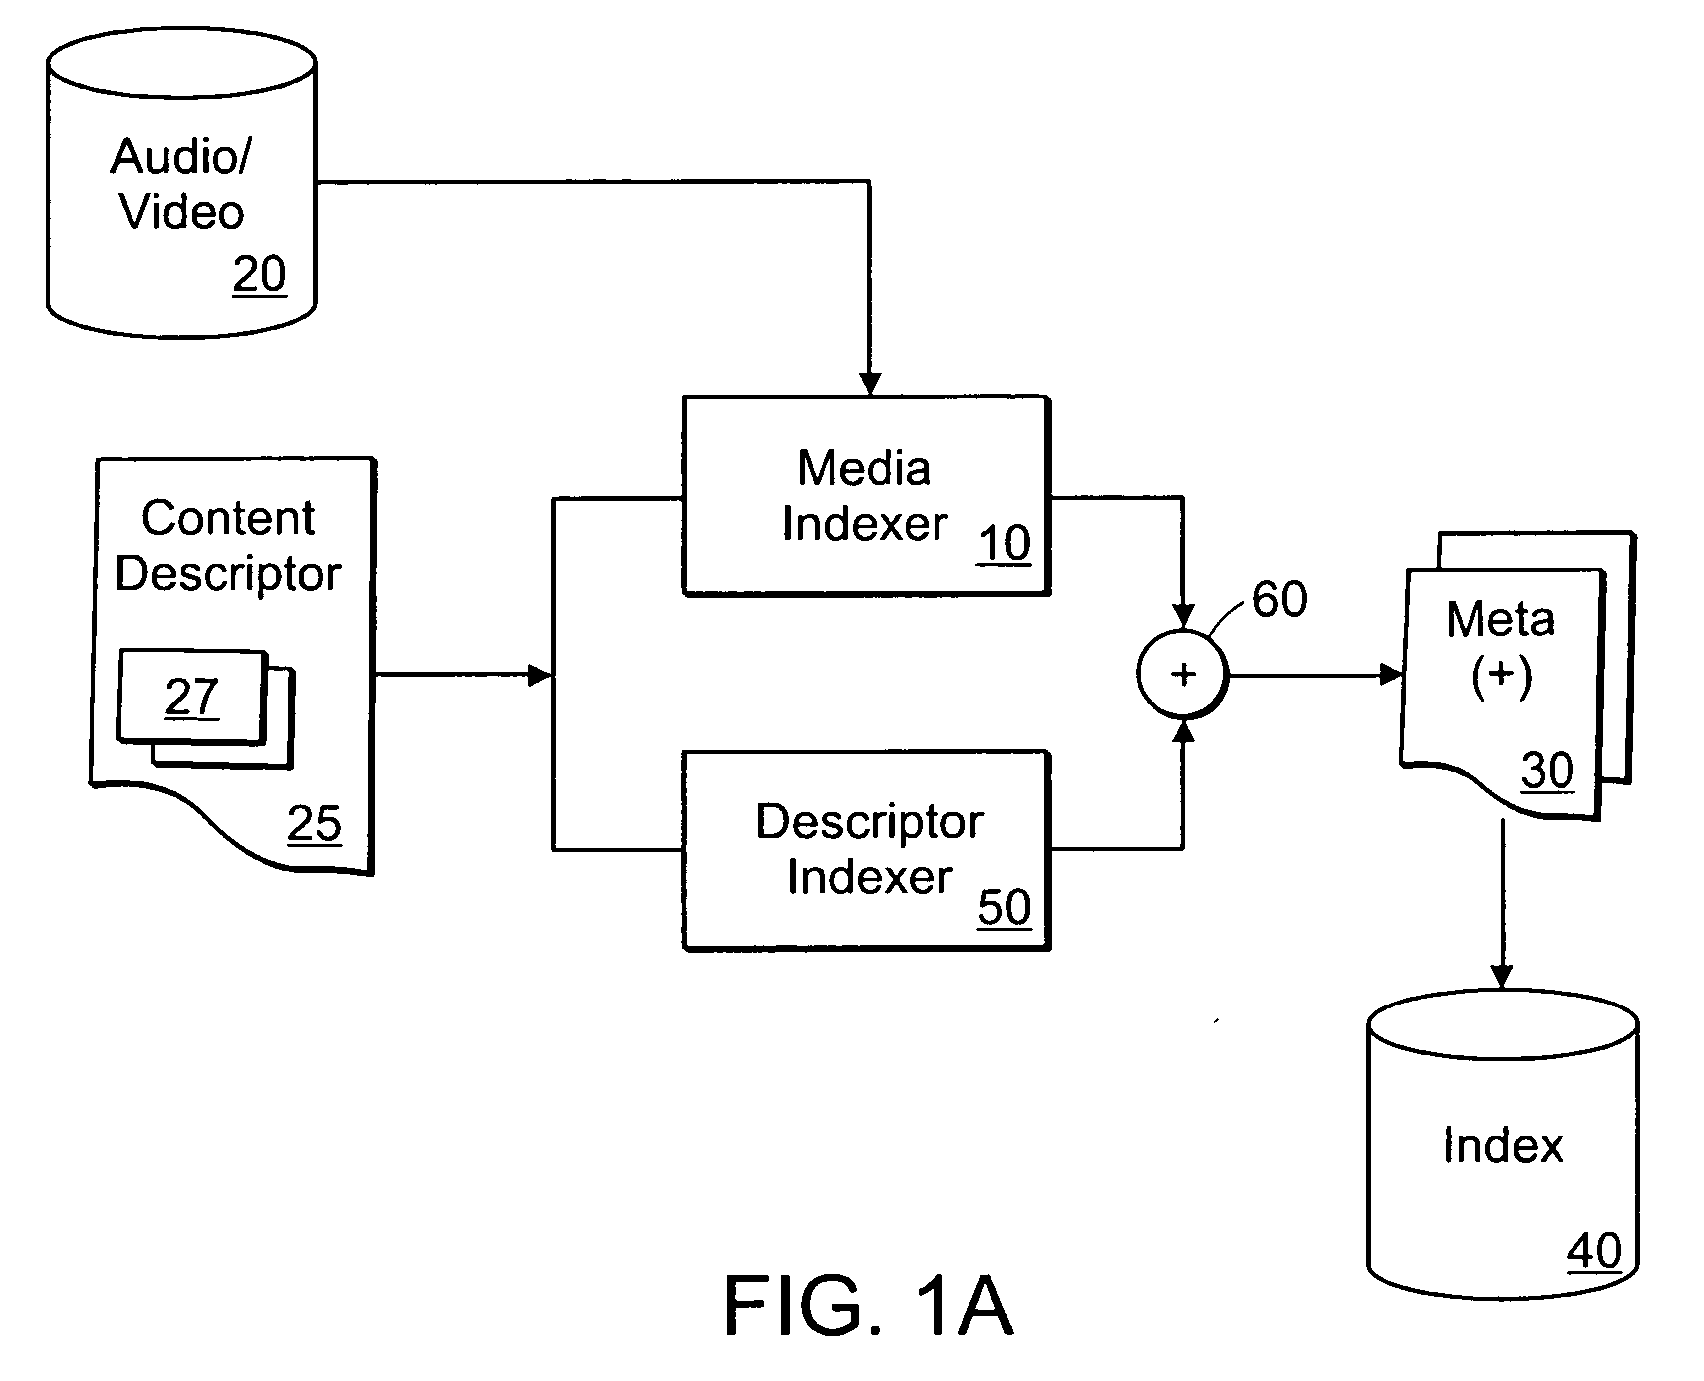 Method and apparatus for timed tagging of media content